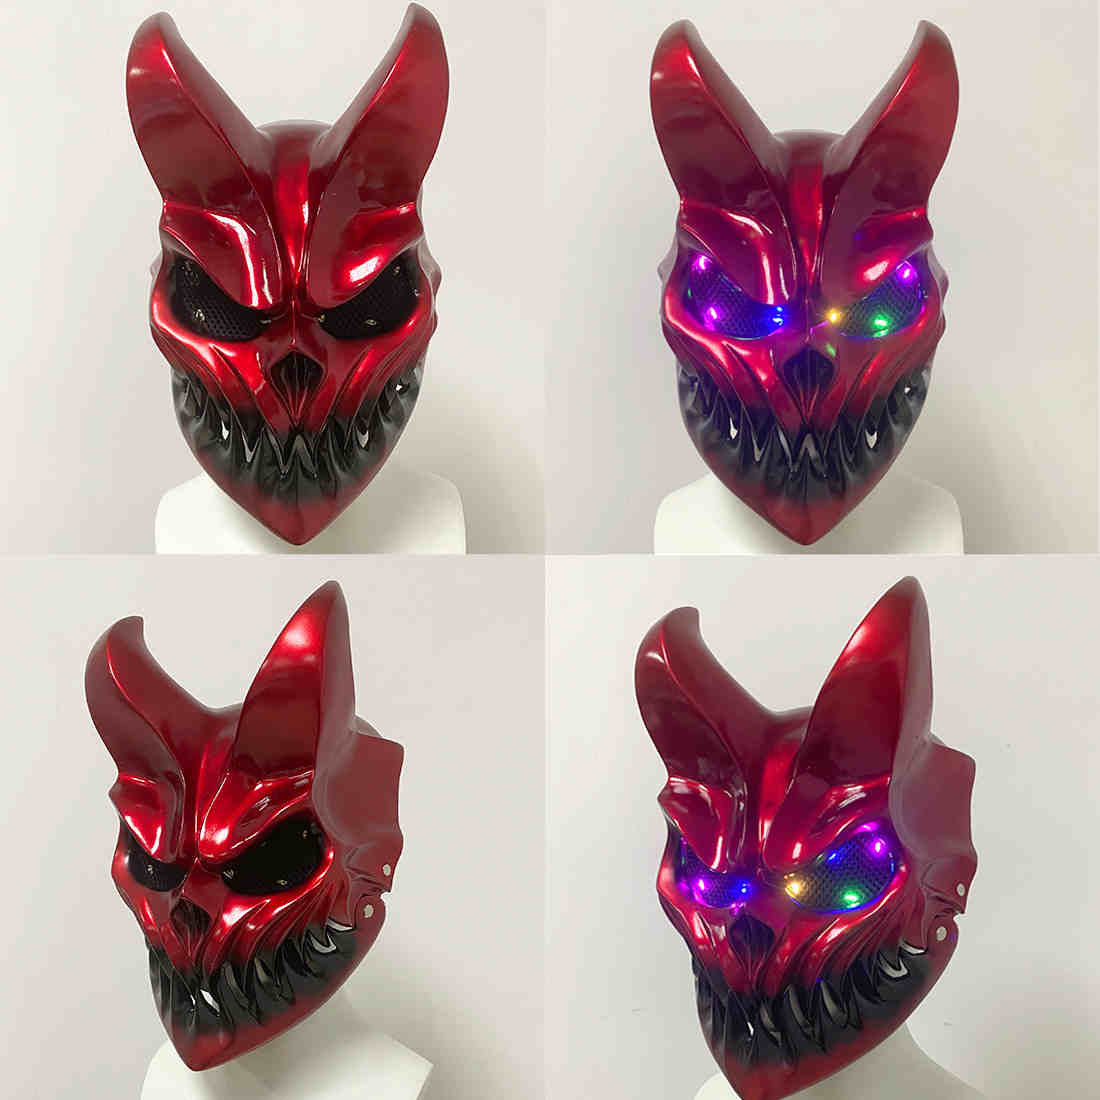 Demon Mask Slaughter To Prevail Mask Kid of Darkness Demolisher Mask LED Light Up Halloween Scary Glowing Mask